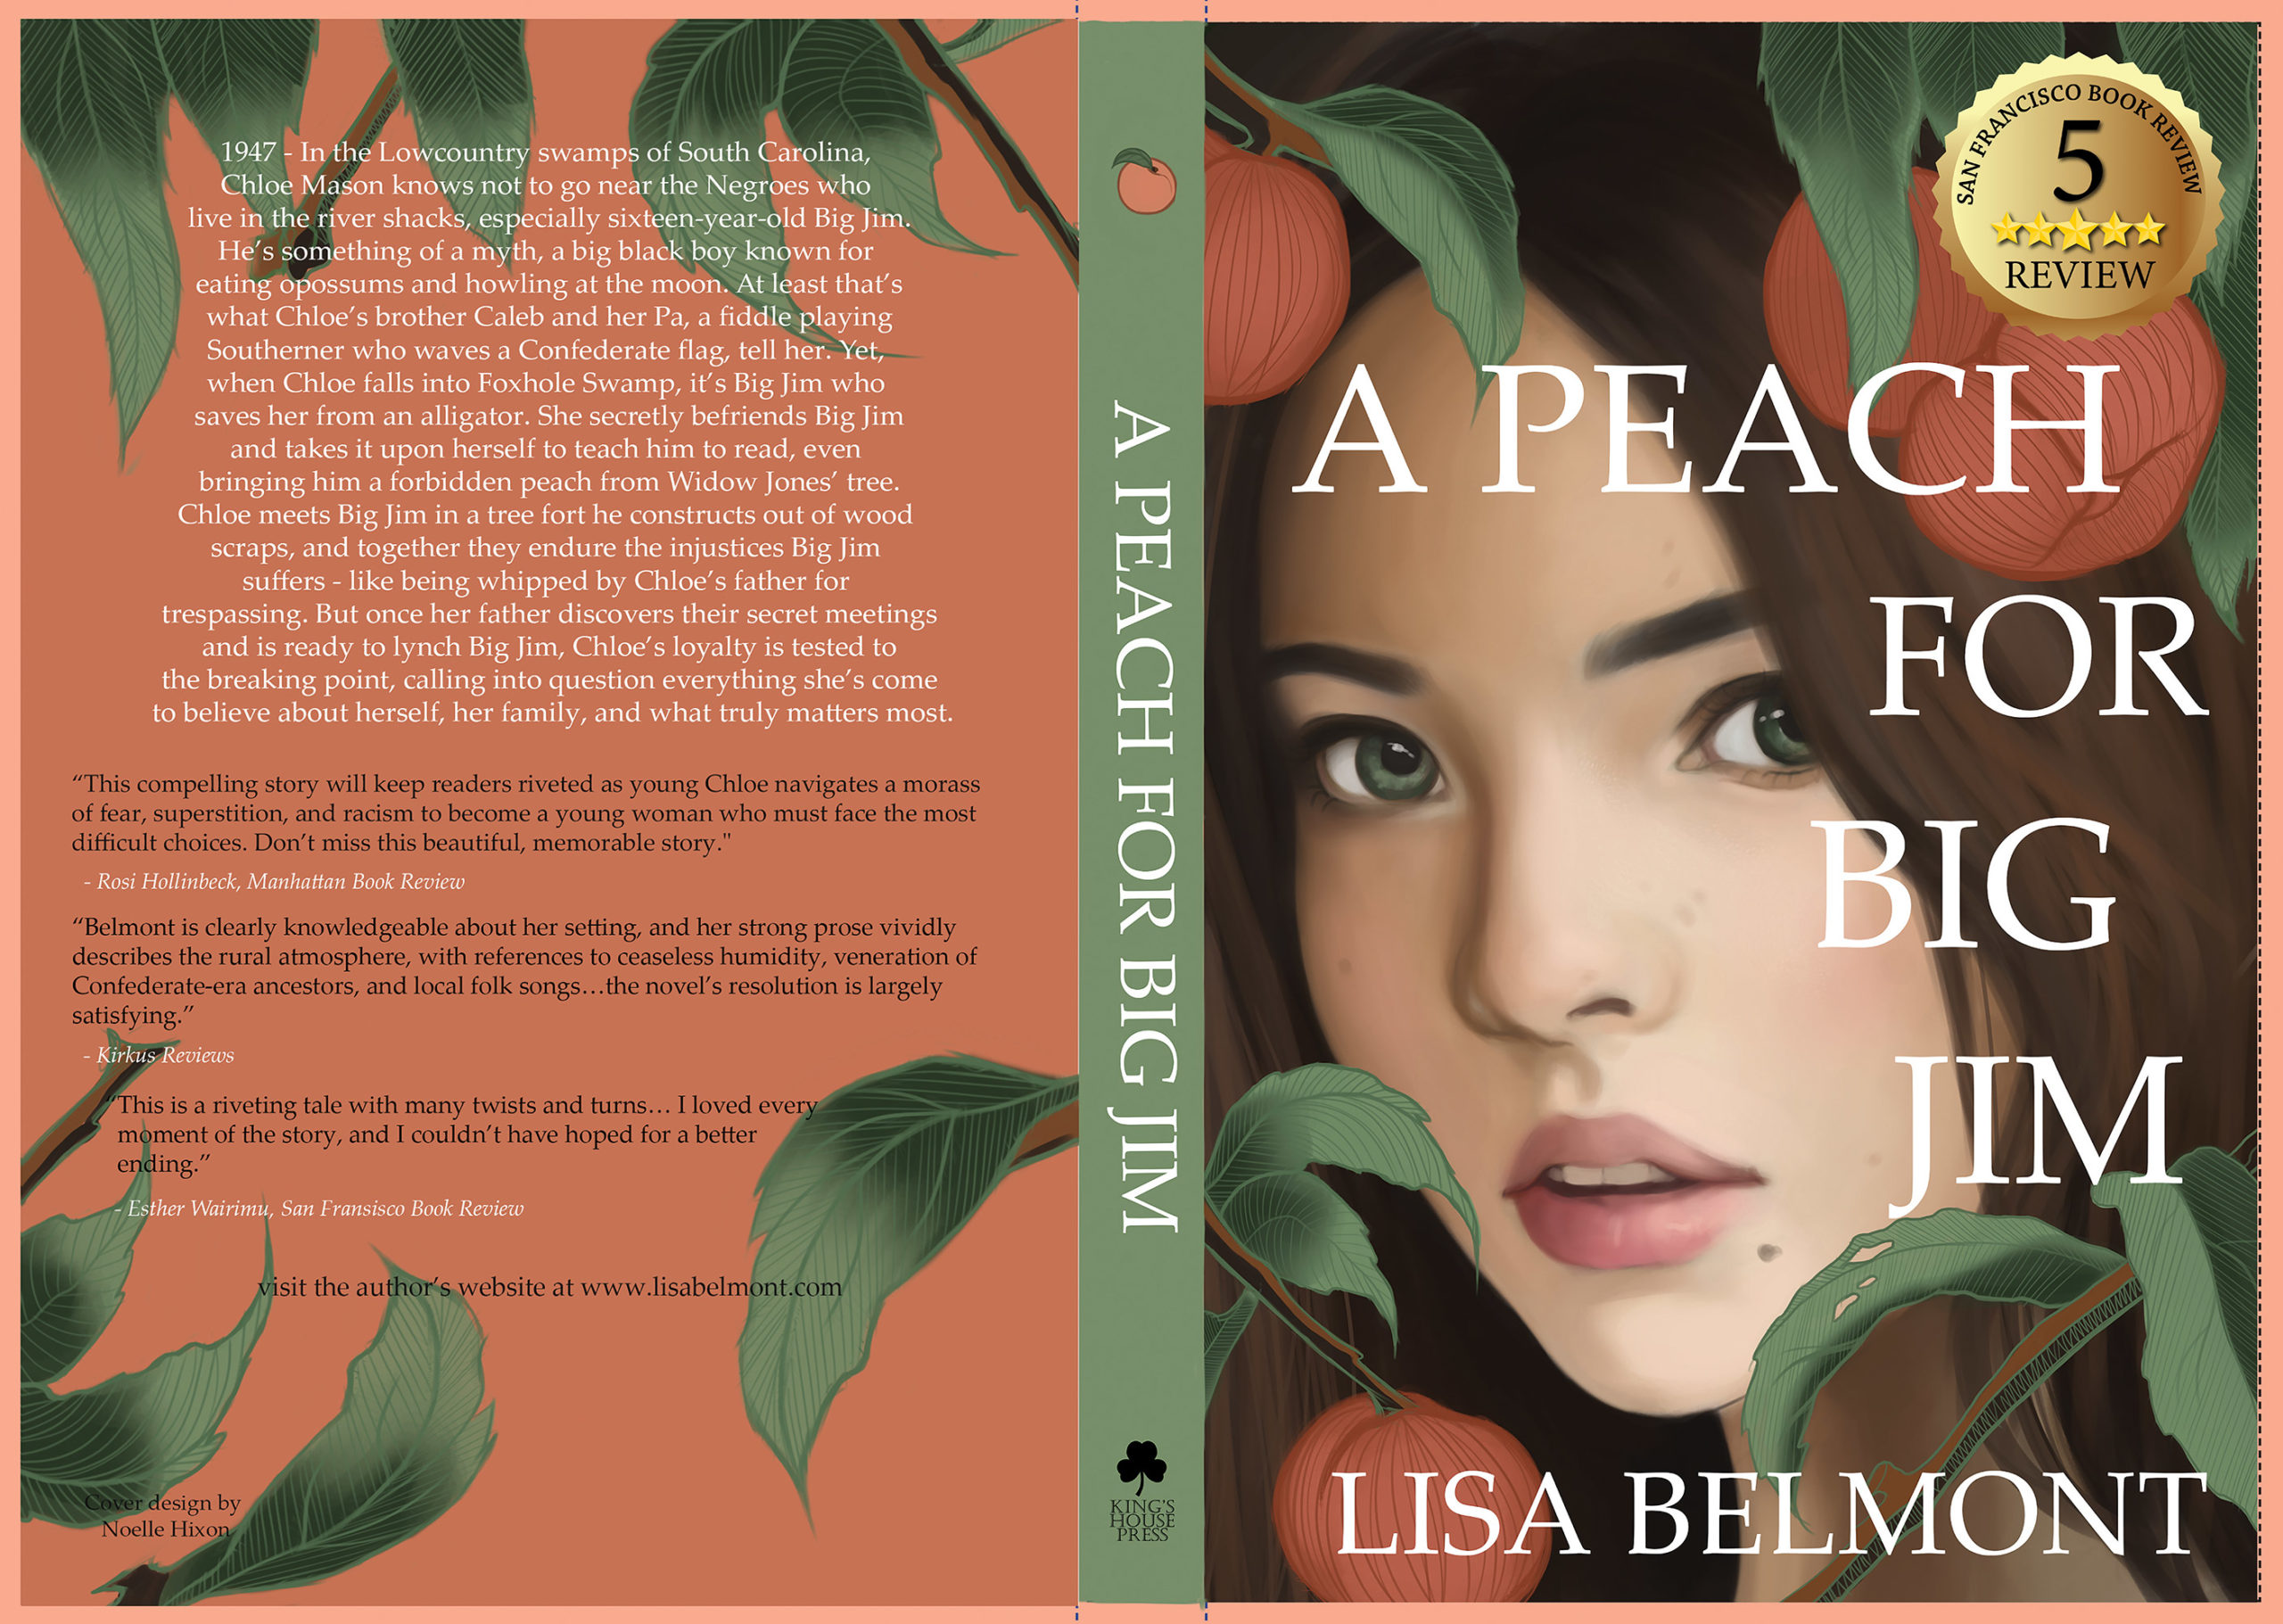 A Peach For Big Jim by Lisa Belmont